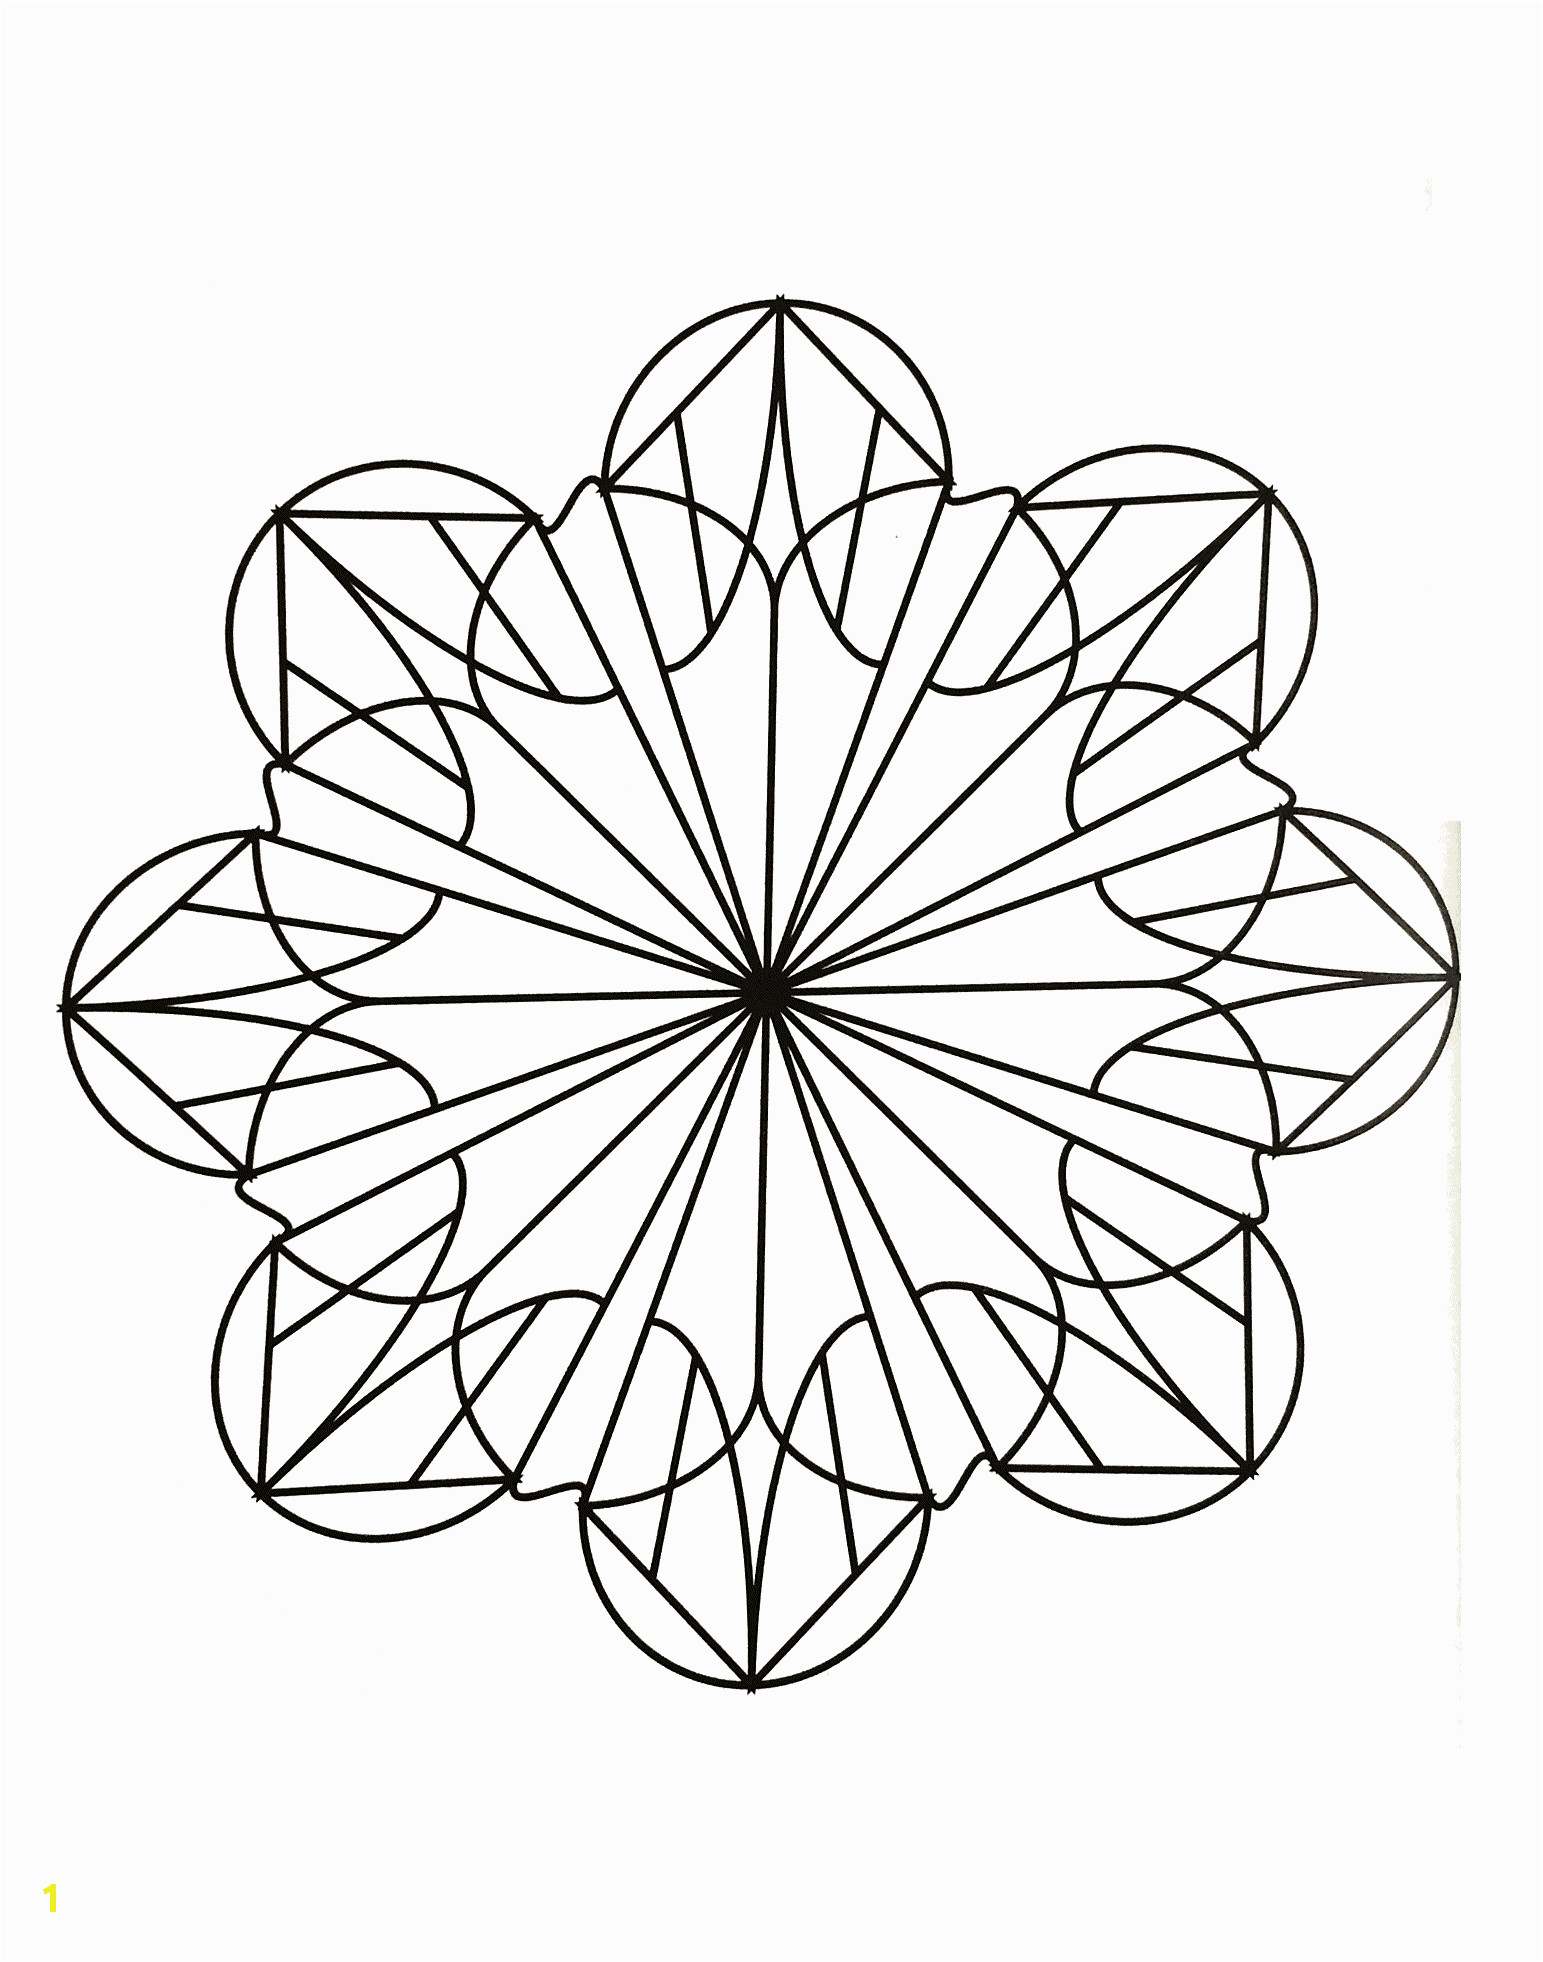 Easy Mandala Coloring Pages for Kids Simple Mandala 55 Mandalas Coloring Pages for Kids to